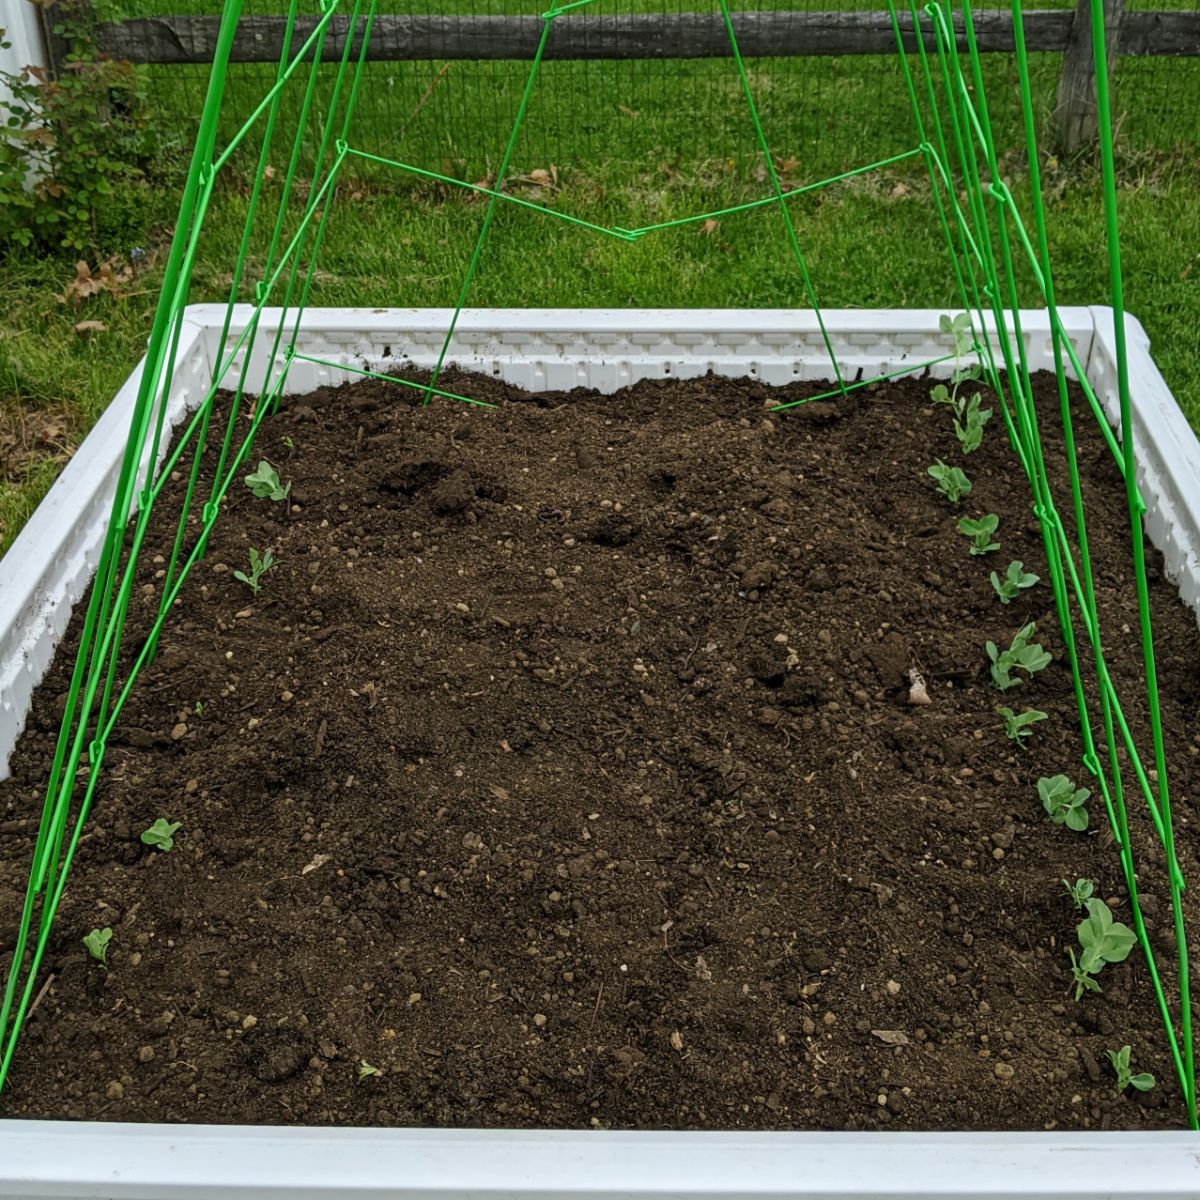 Panacea Tomato Tower Review photo of green trellis with snow peas in a white raised garden bed filled with soil